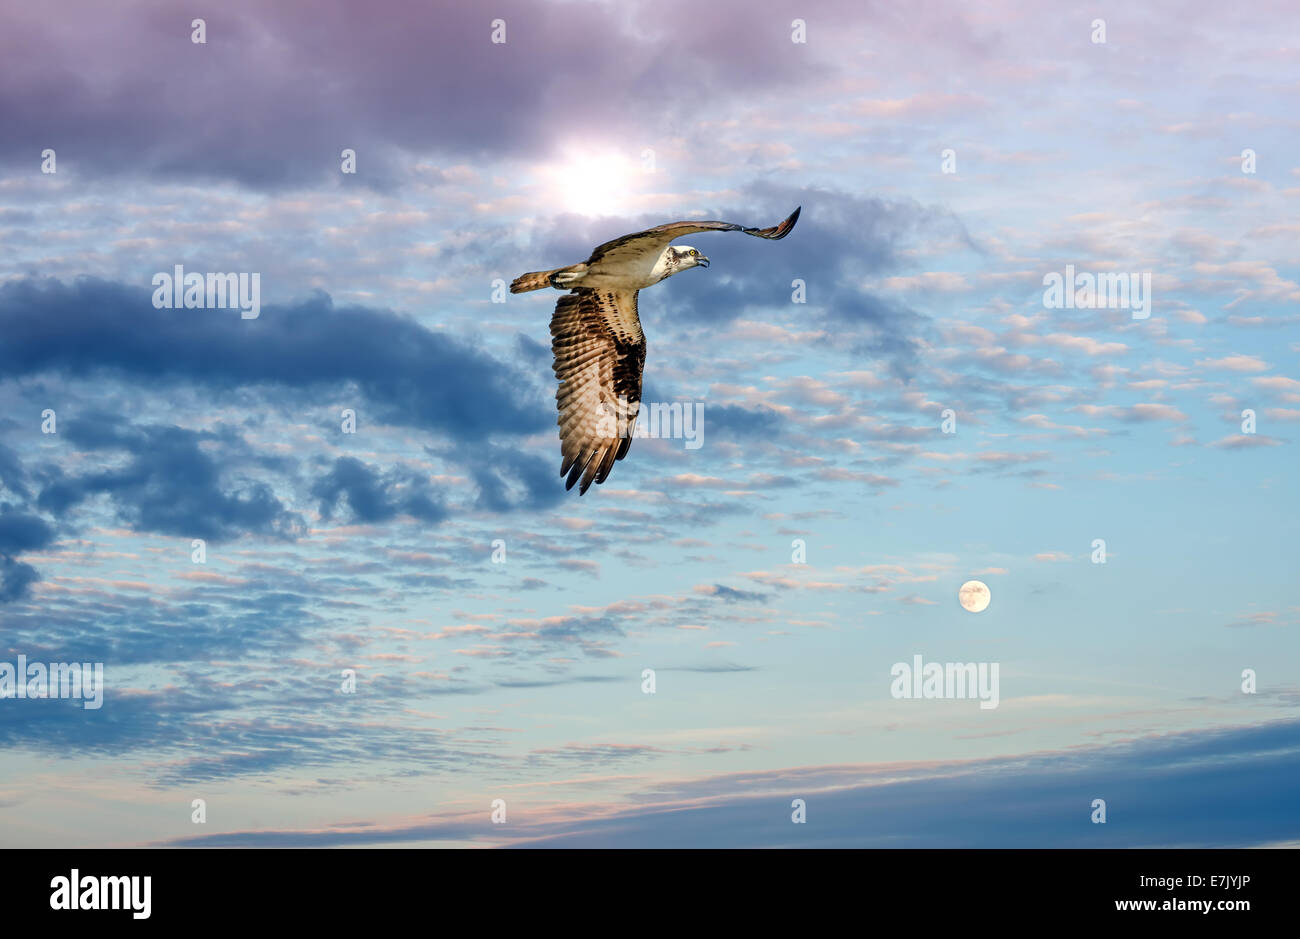 Osprey flying in the clouds with clouds and sun Stock Photo